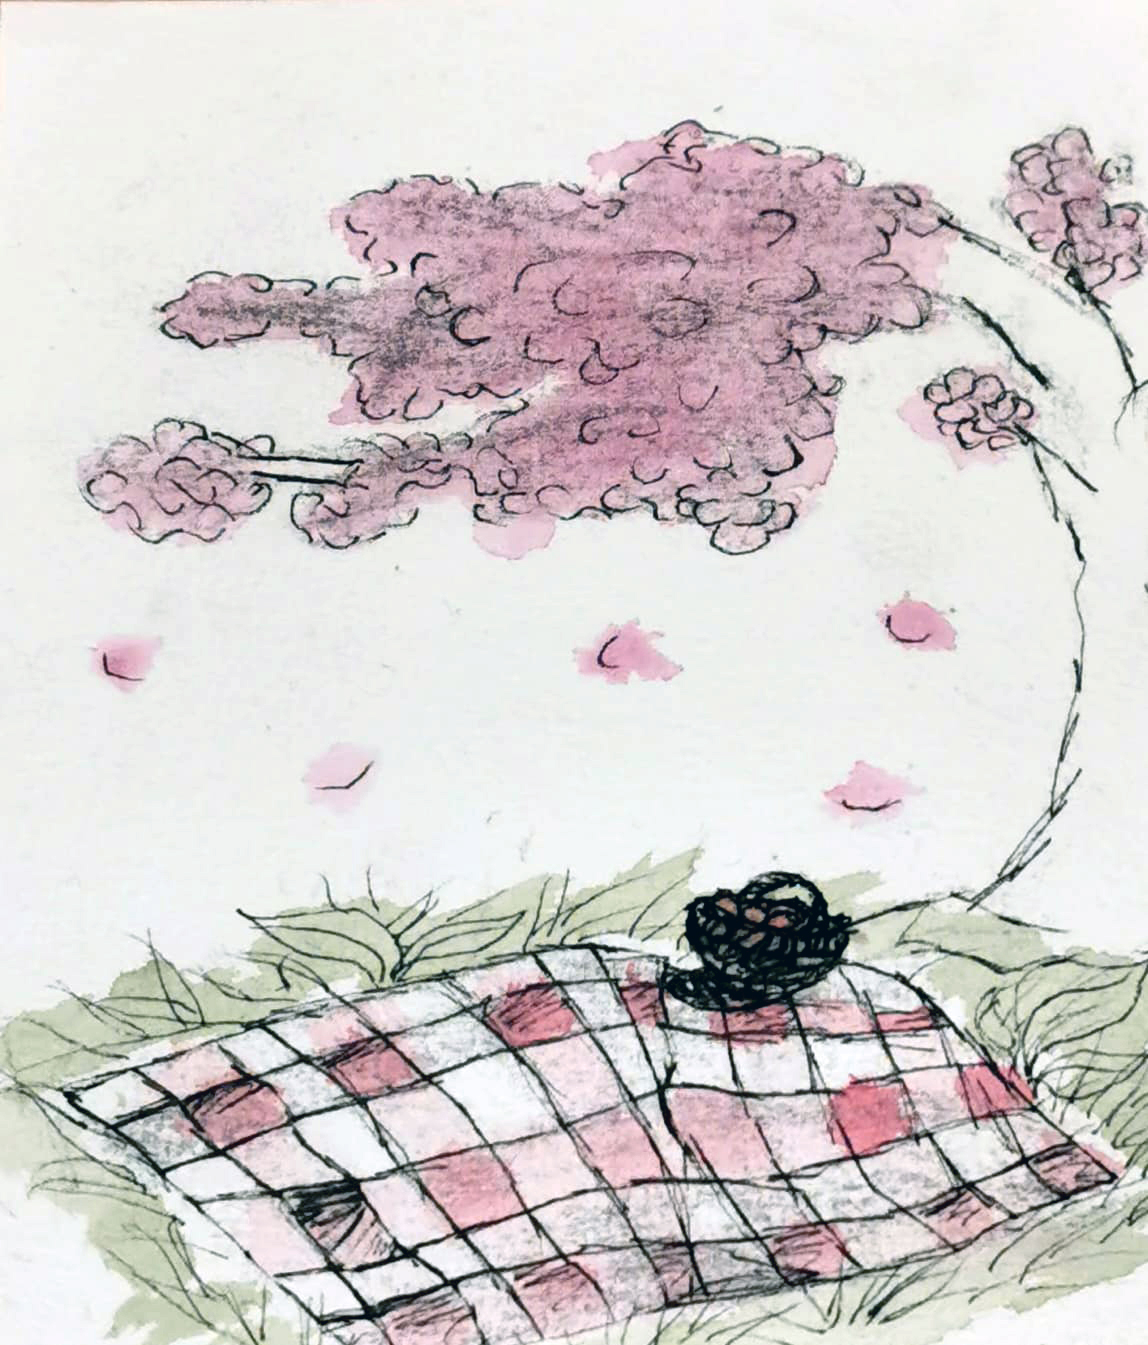 Picnic drawing by Bethea Rose